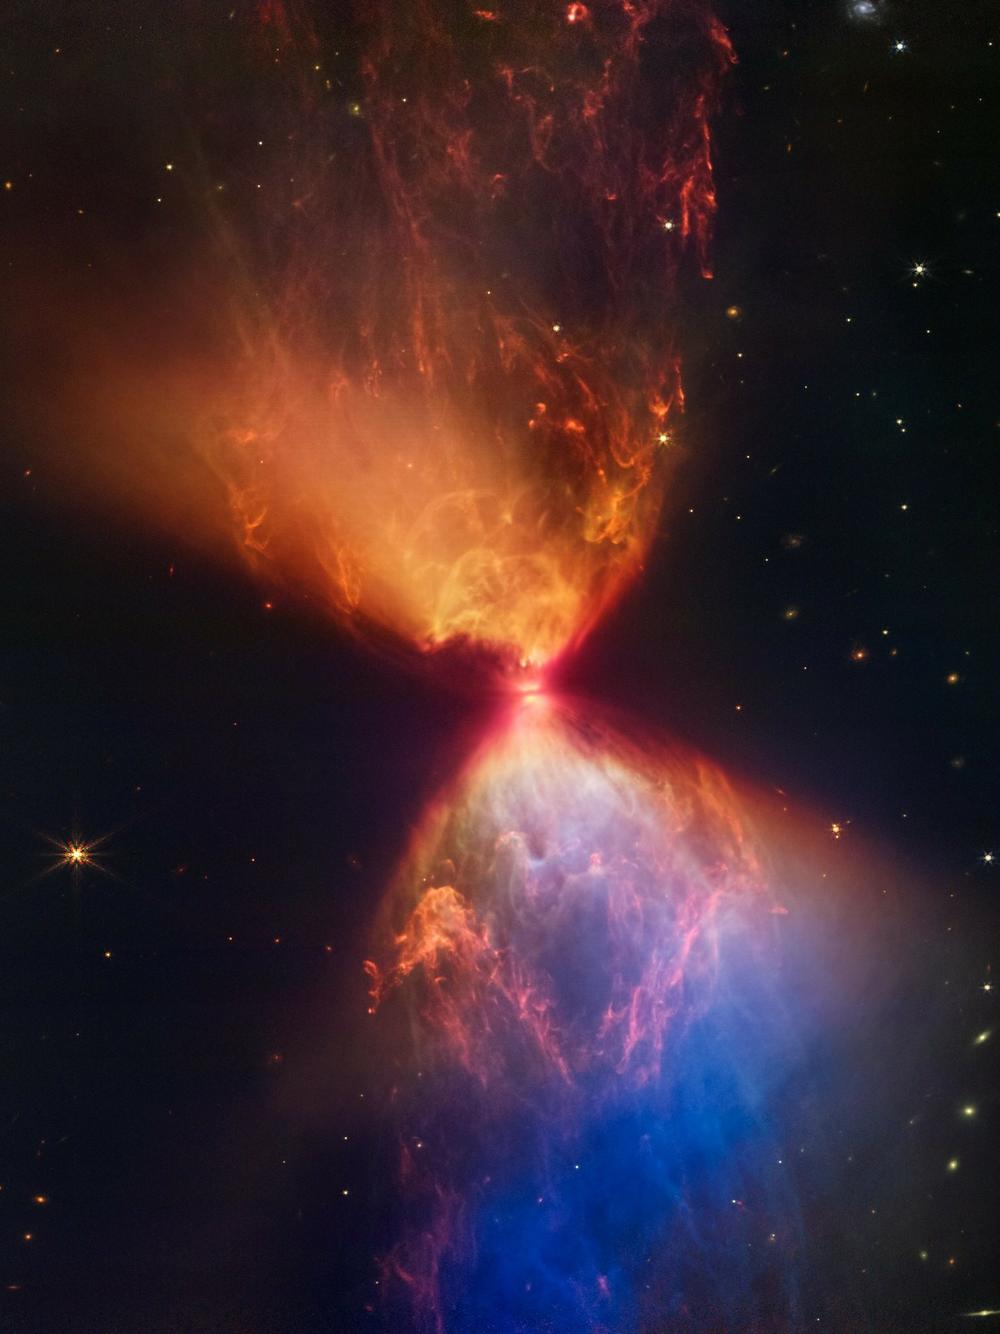 Webb captures the image of a protostar, the very beginning of a new star. The 